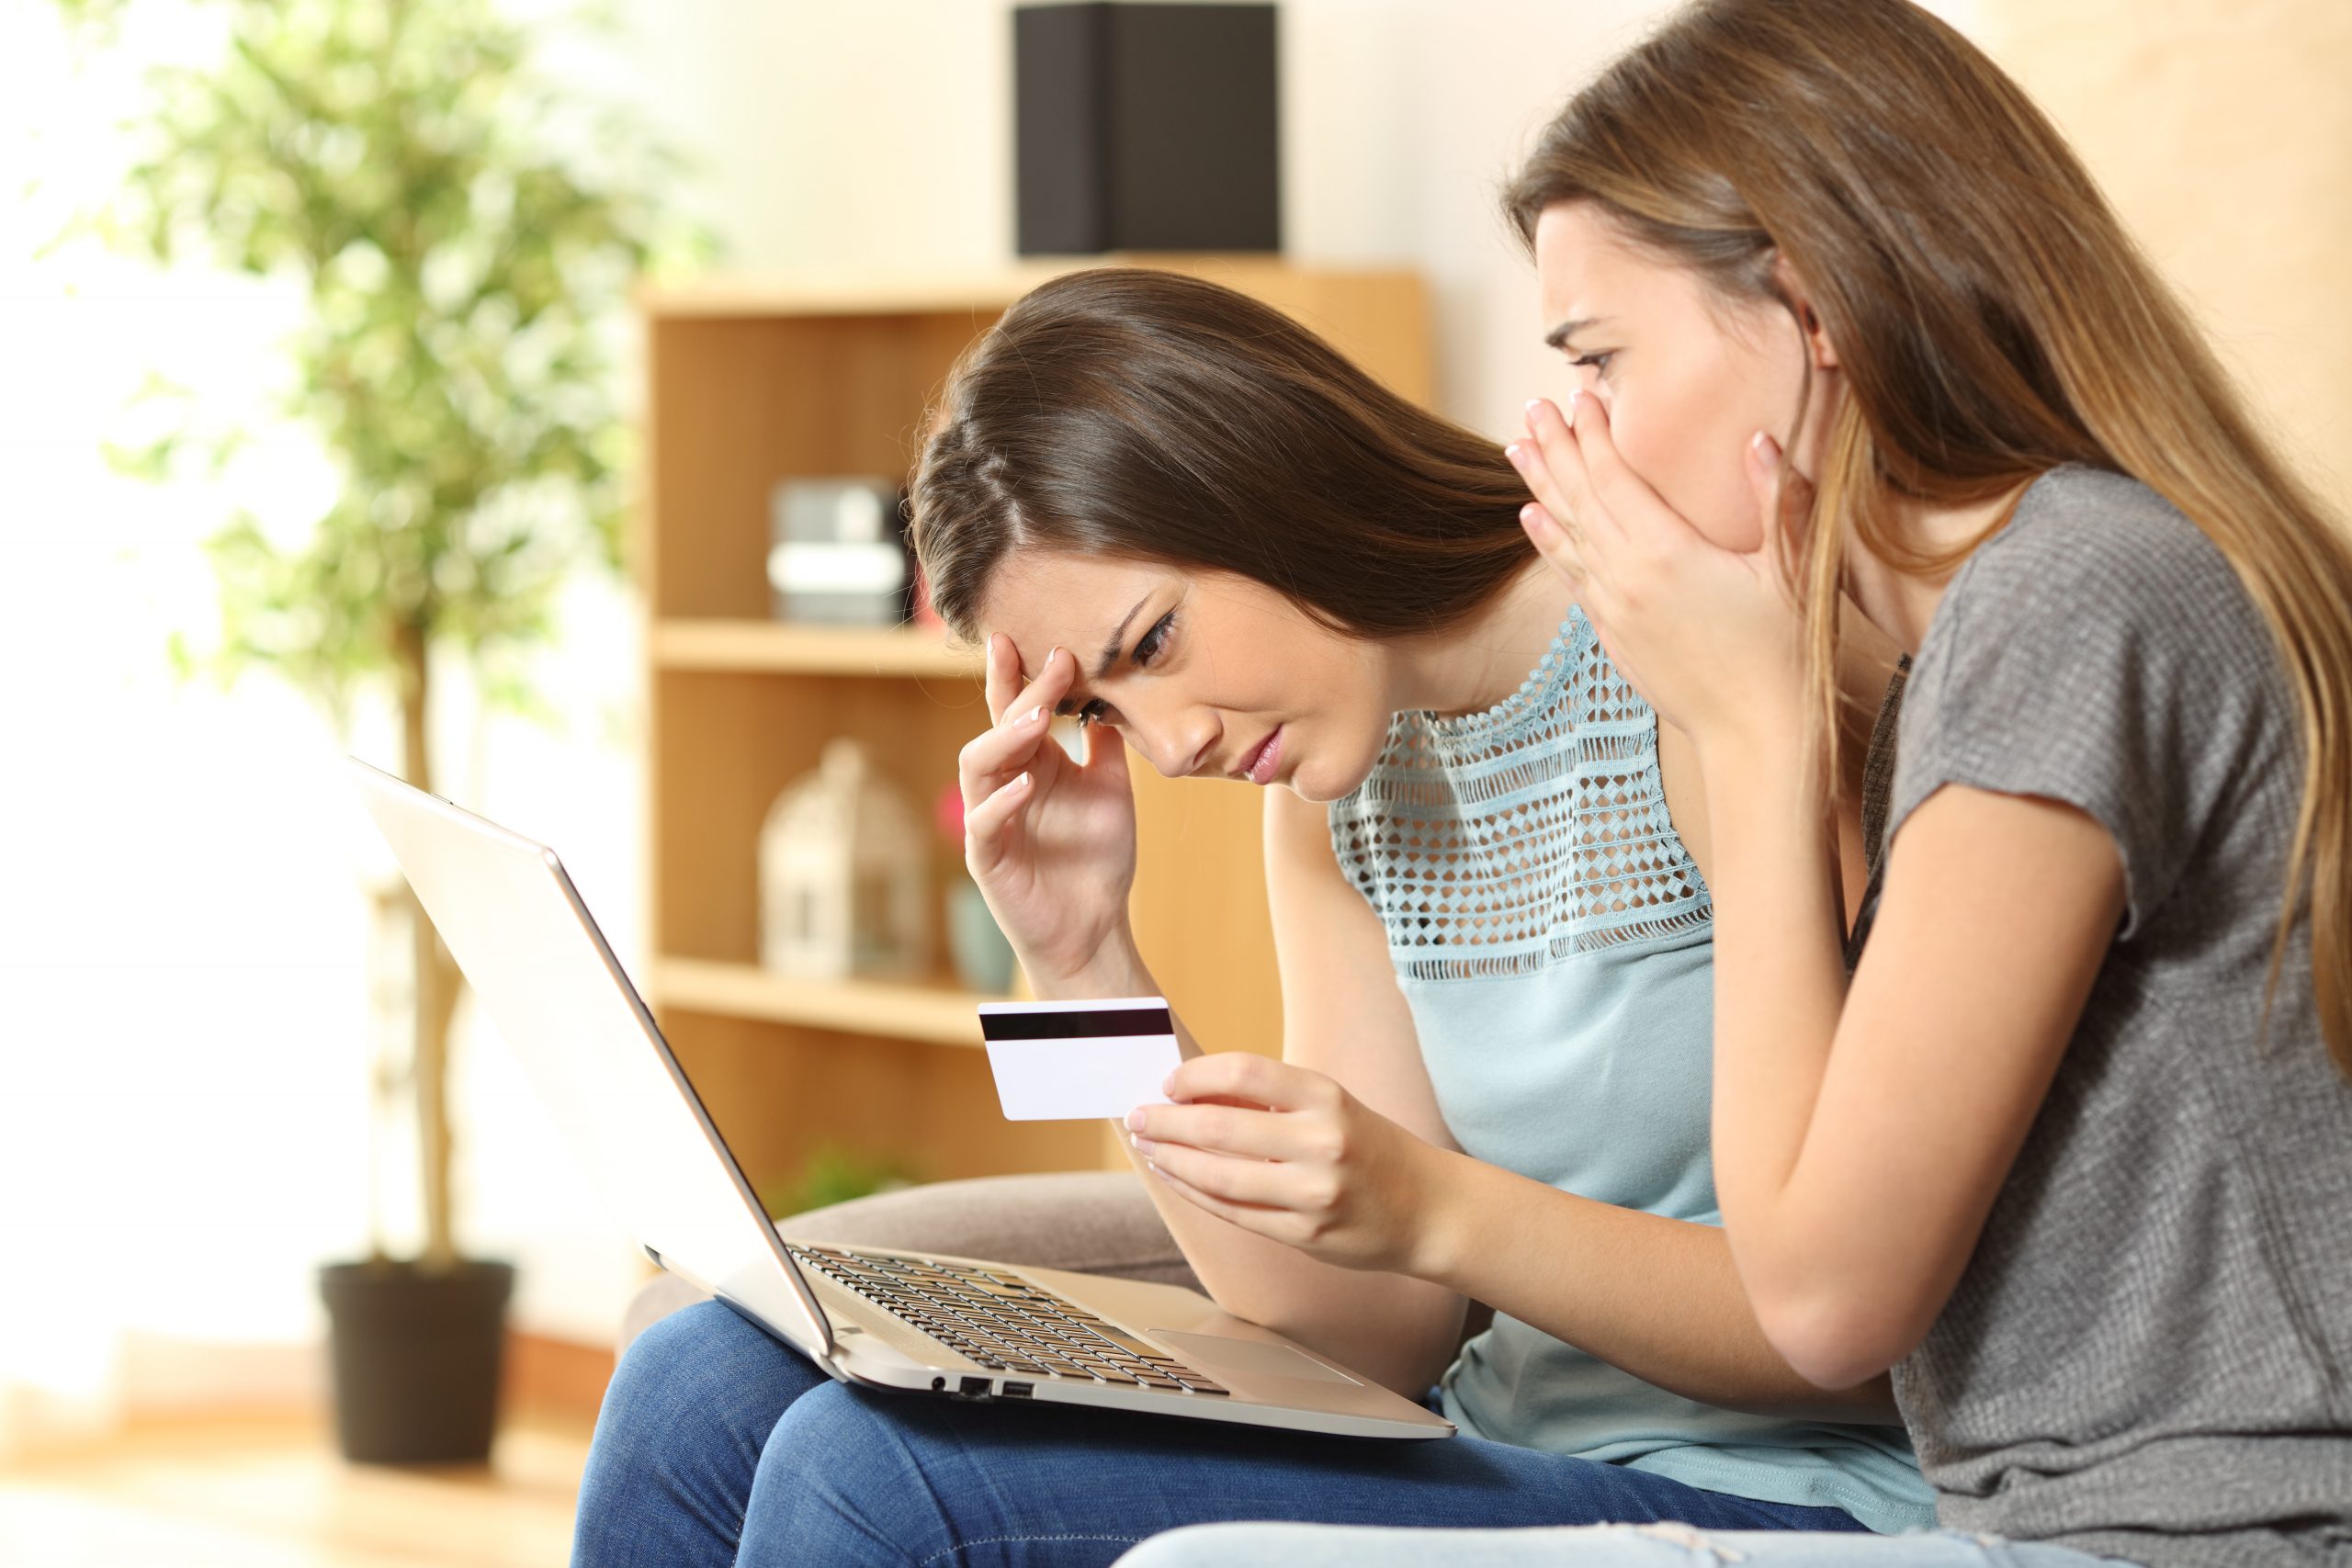 Two teenage girls with laptop and credit card in hand